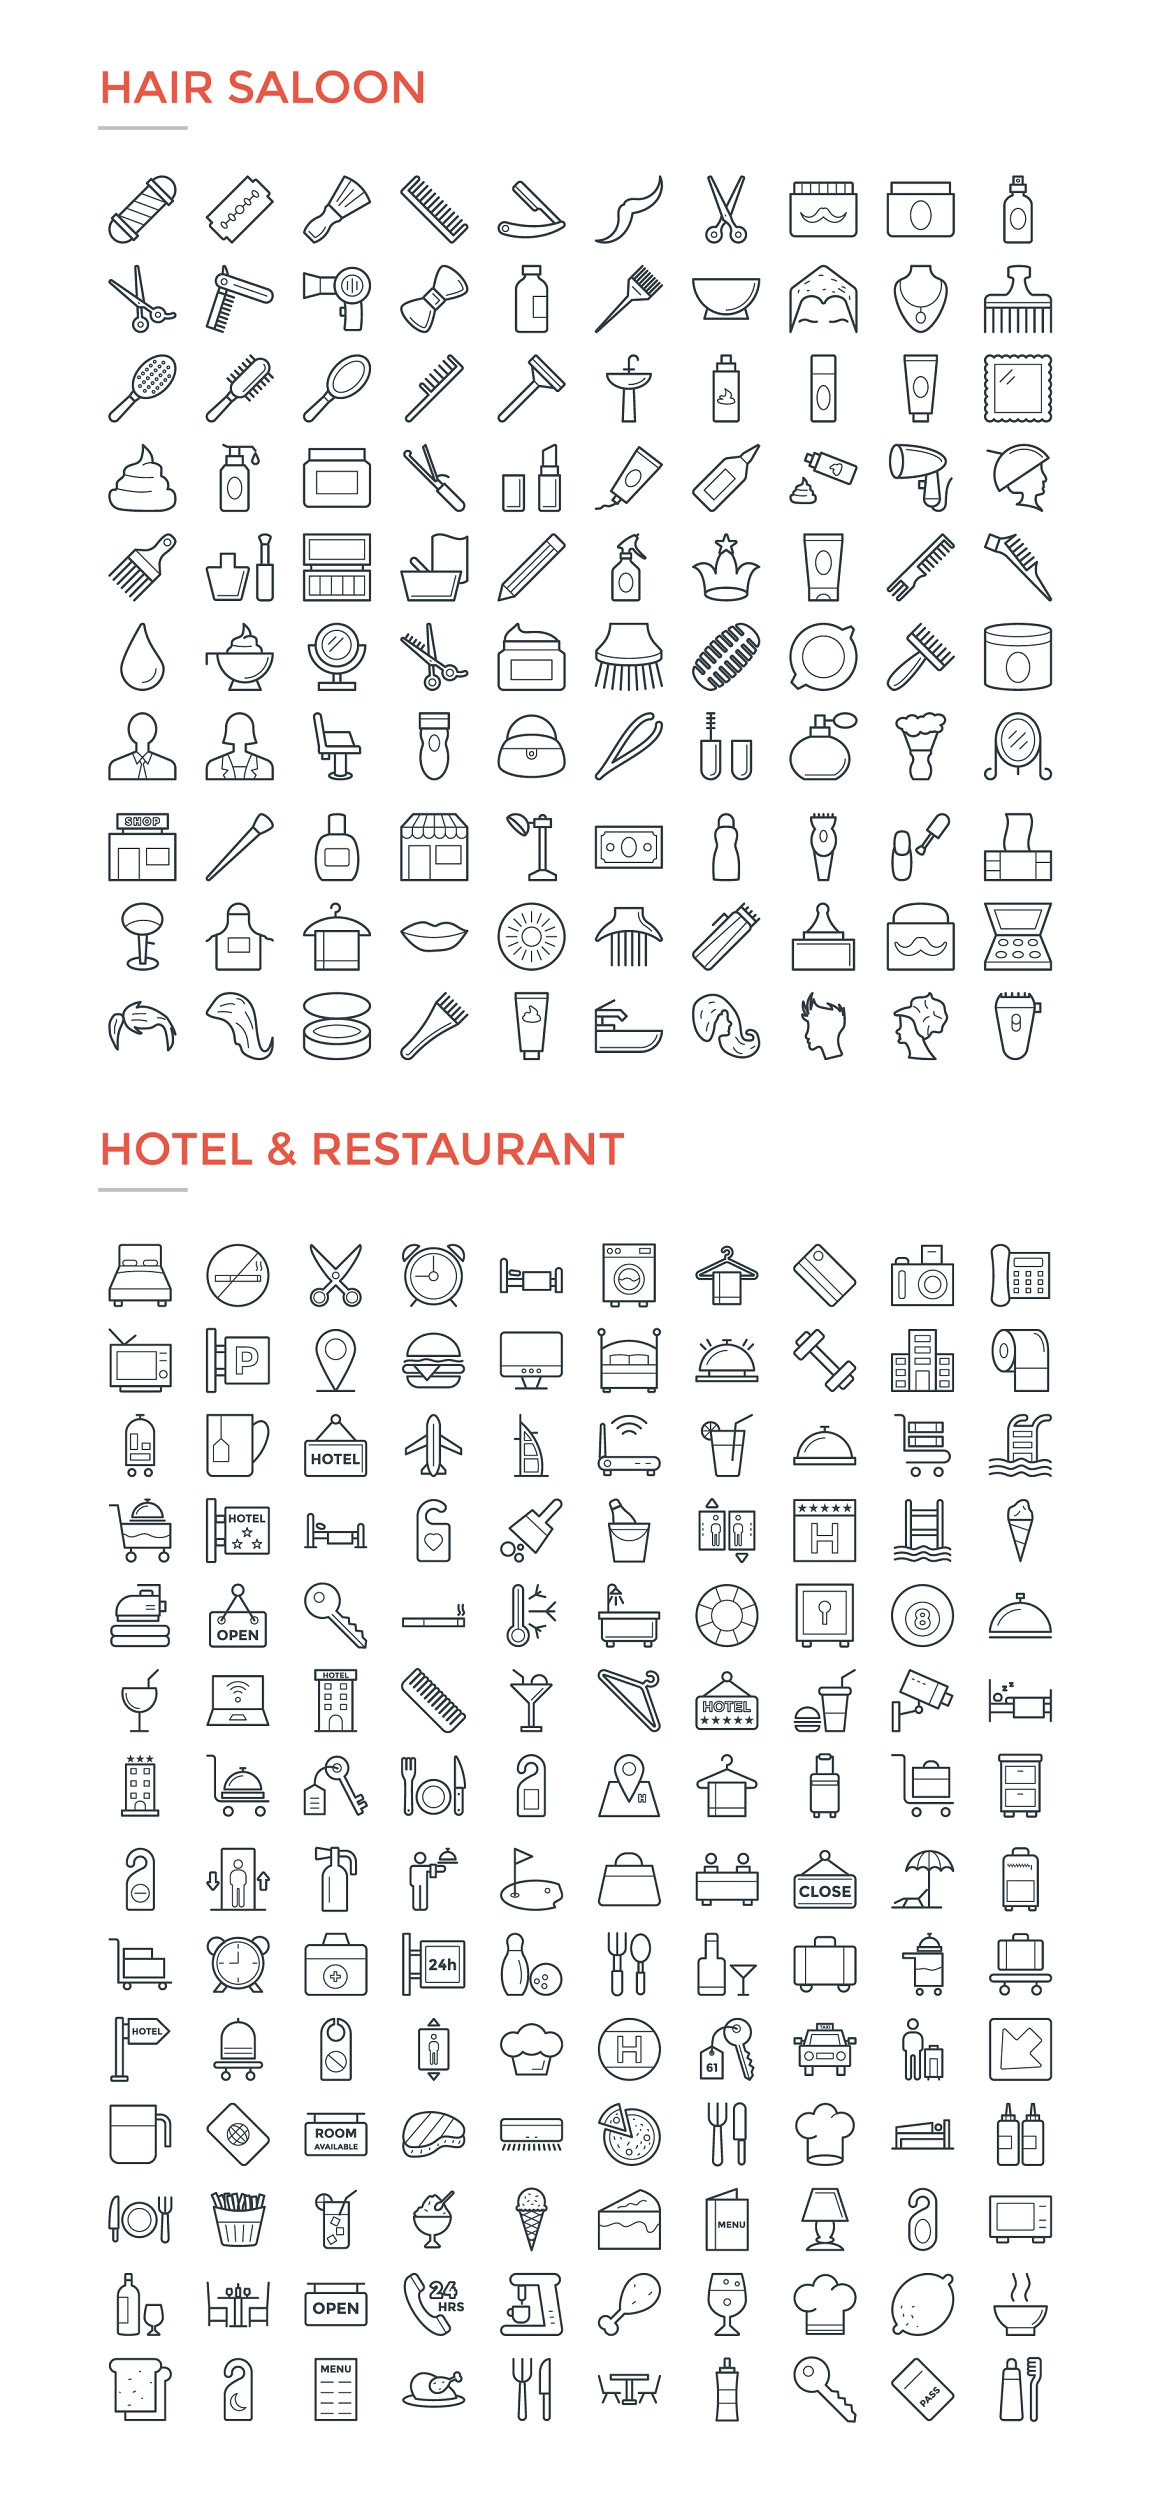 Bundle of hair saloon and hotel & restaurant icons on a white background.